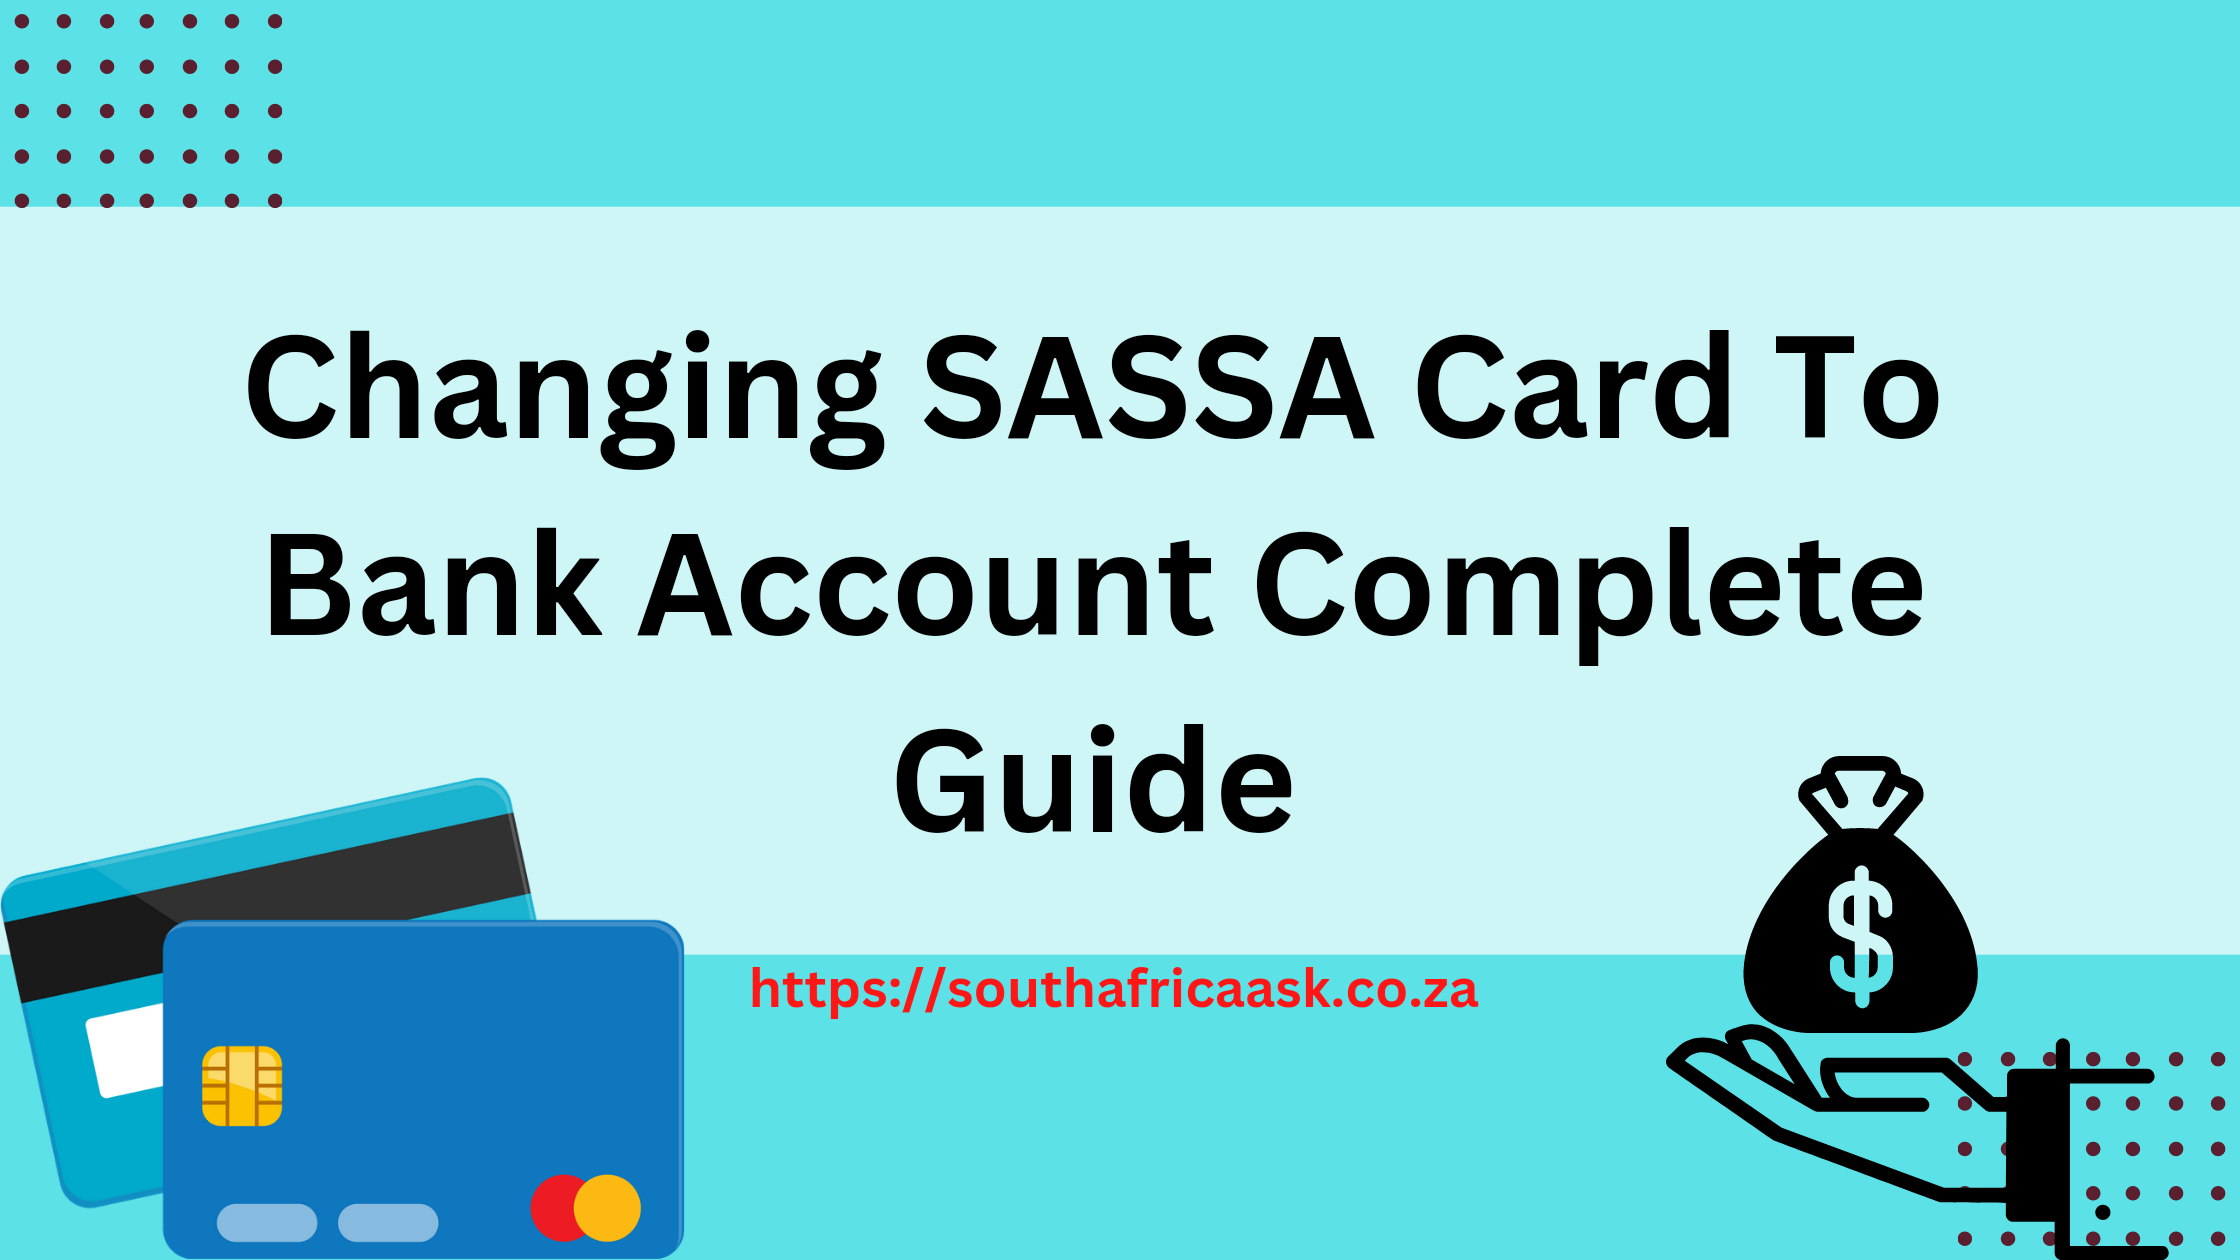 Changing SASSA Card To Bank Account Complete Guide